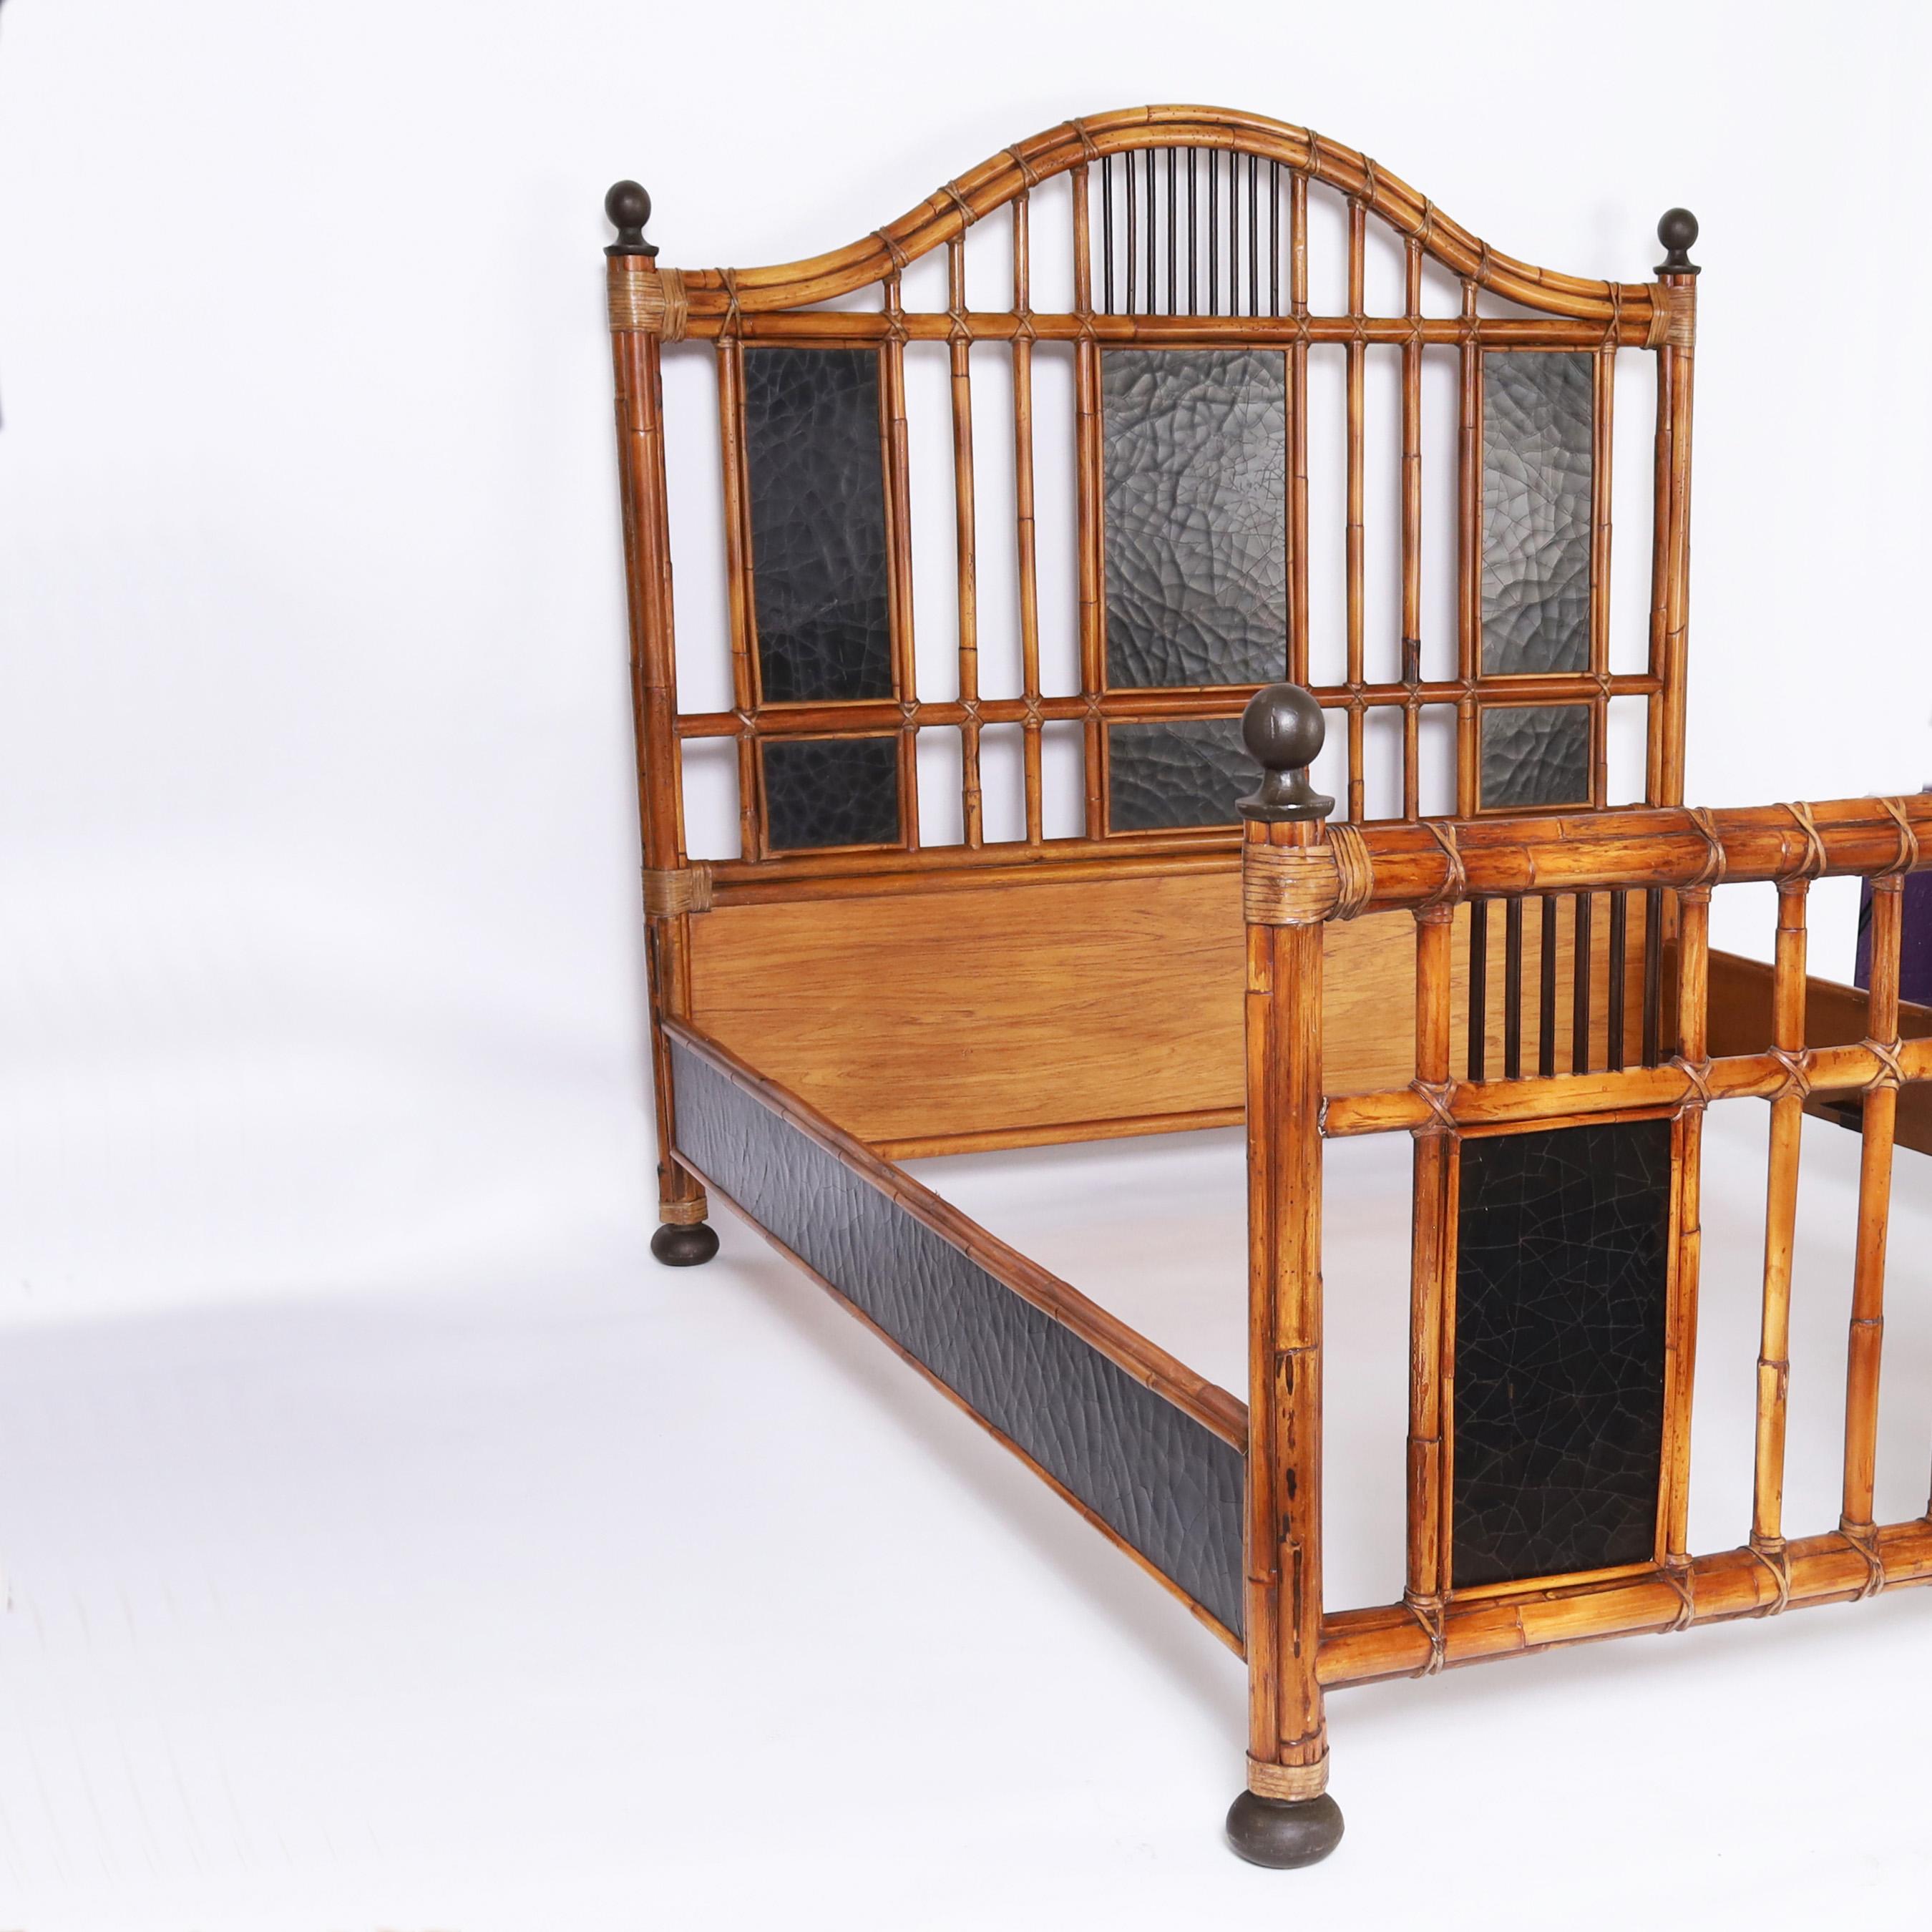 British Colonial style queen size bed frame crafted in bamboo and bent bamboo with reed wrapped joints, lacquered panels with a crackle glaze, and bronze finials and feet. Signed Milling Road for Baker. 

Inside dimensions- W: 62 D: 80